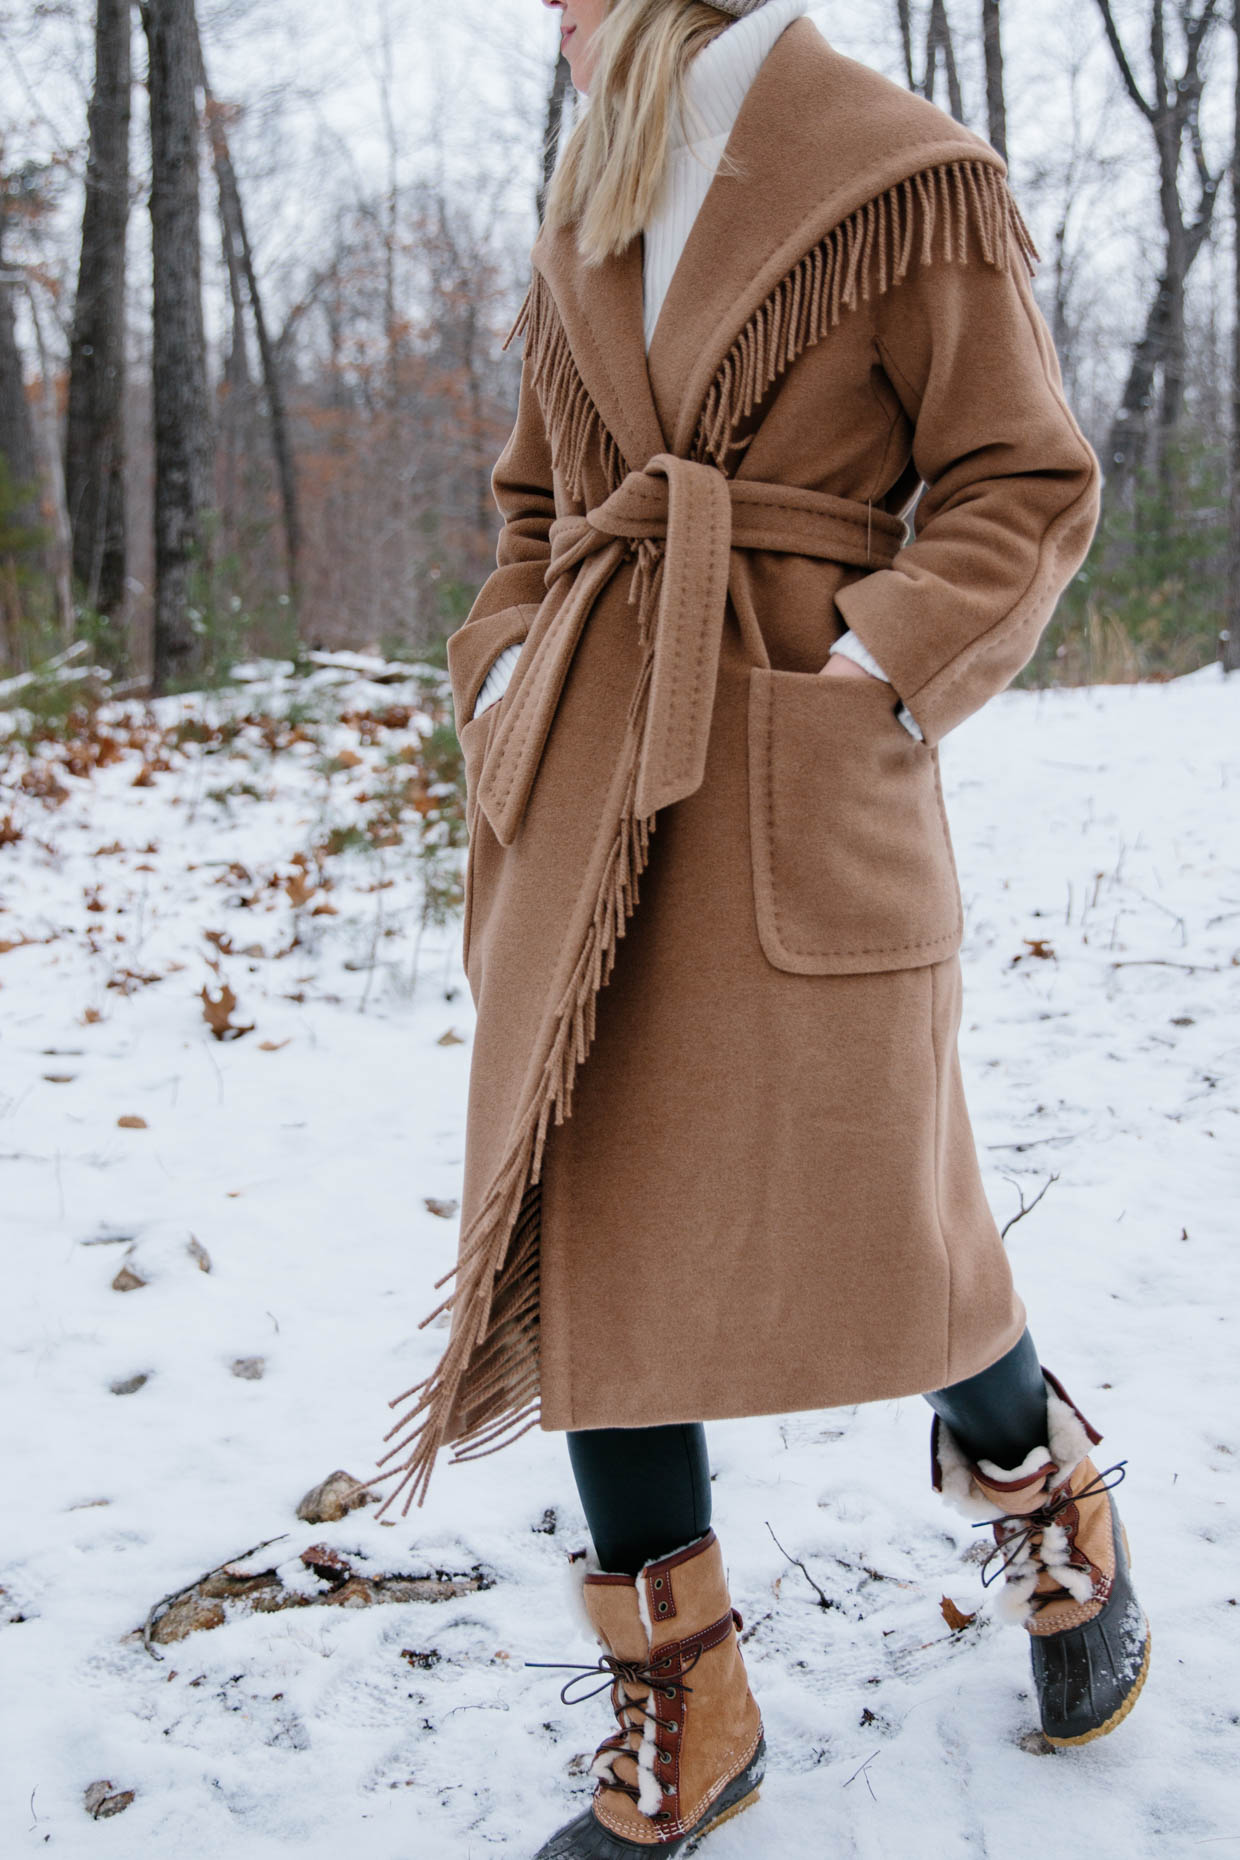 Snow Day in the Woods: Fringe Coat with Faux Leather Leggings & Sherpa  Boots - Meagan's Moda